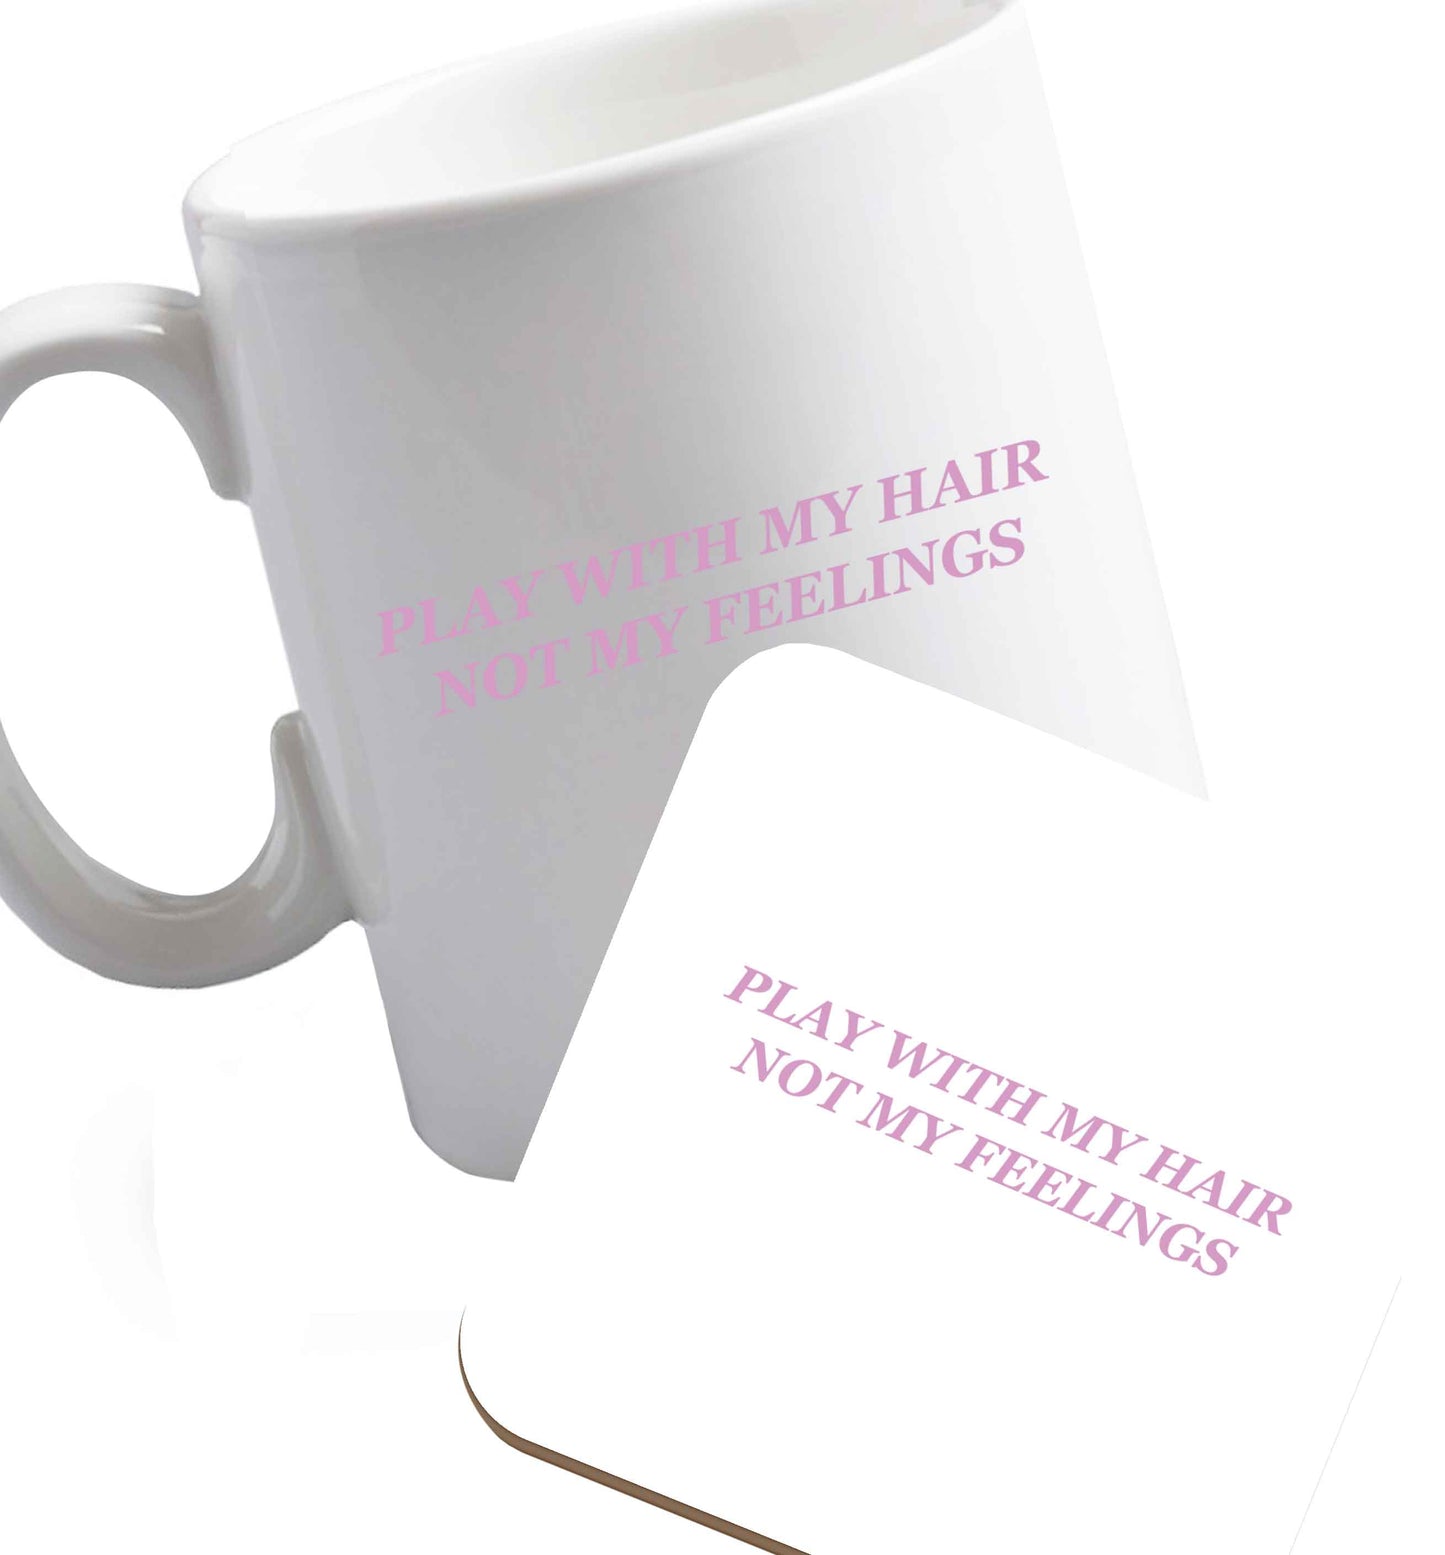 10 oz Play with my hair not my feelings  ceramic mug and coaster set right handed